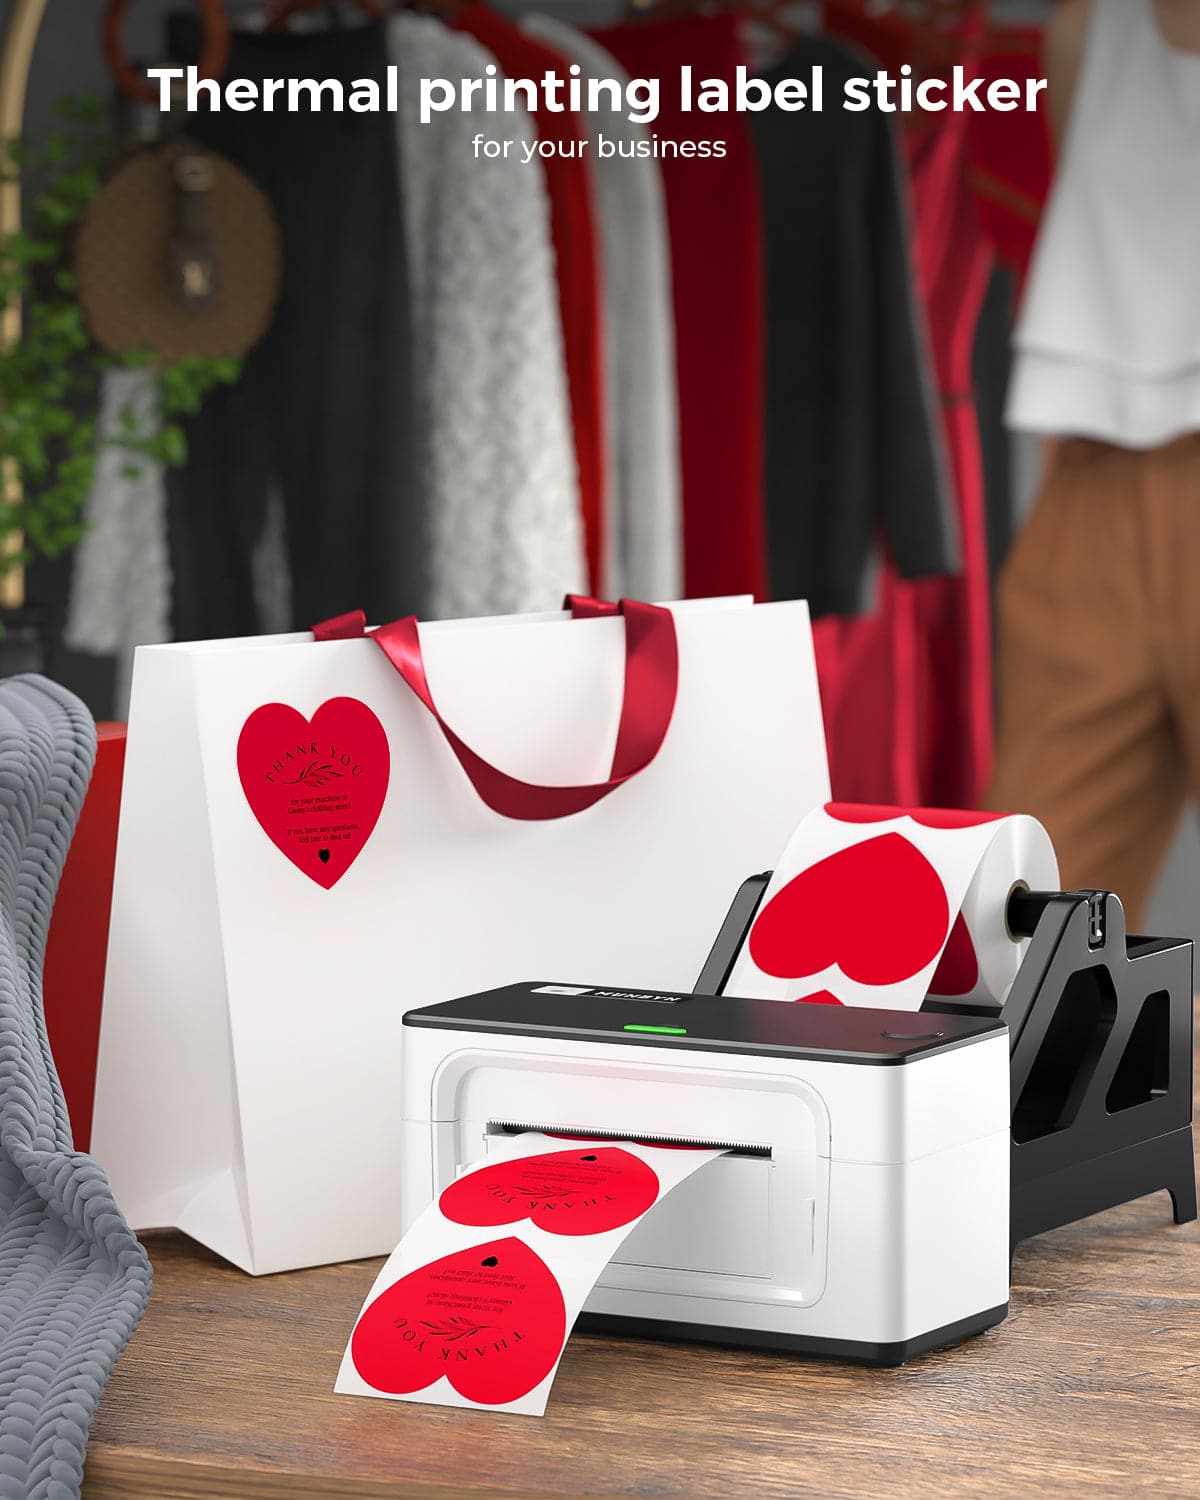 Print red thermal heart stickers with a thermal sticker printer and stick them on the bag.